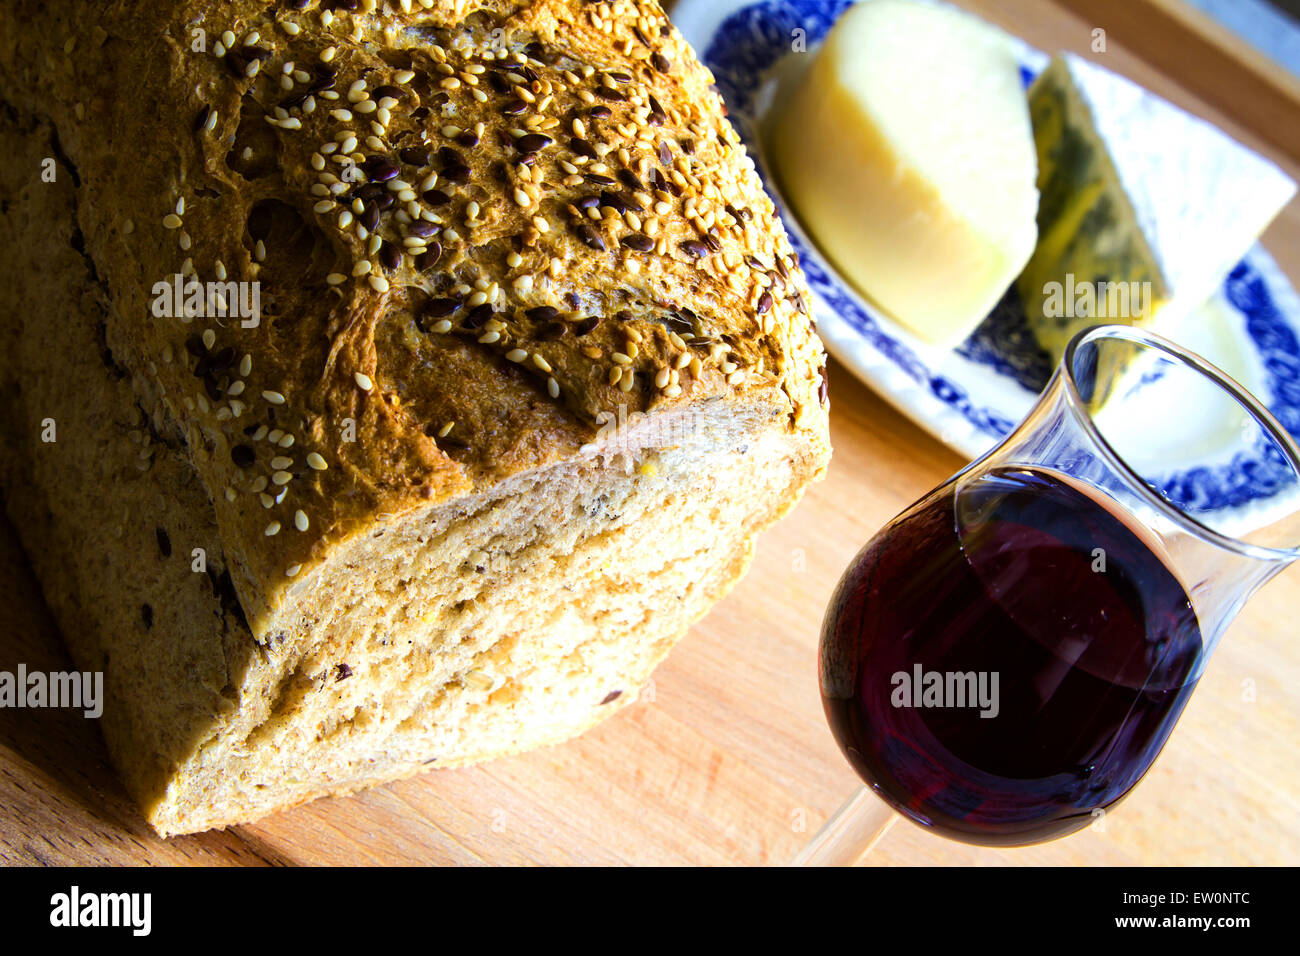 Delicious snack, bread, glass of red wine and cheese Stock Photo